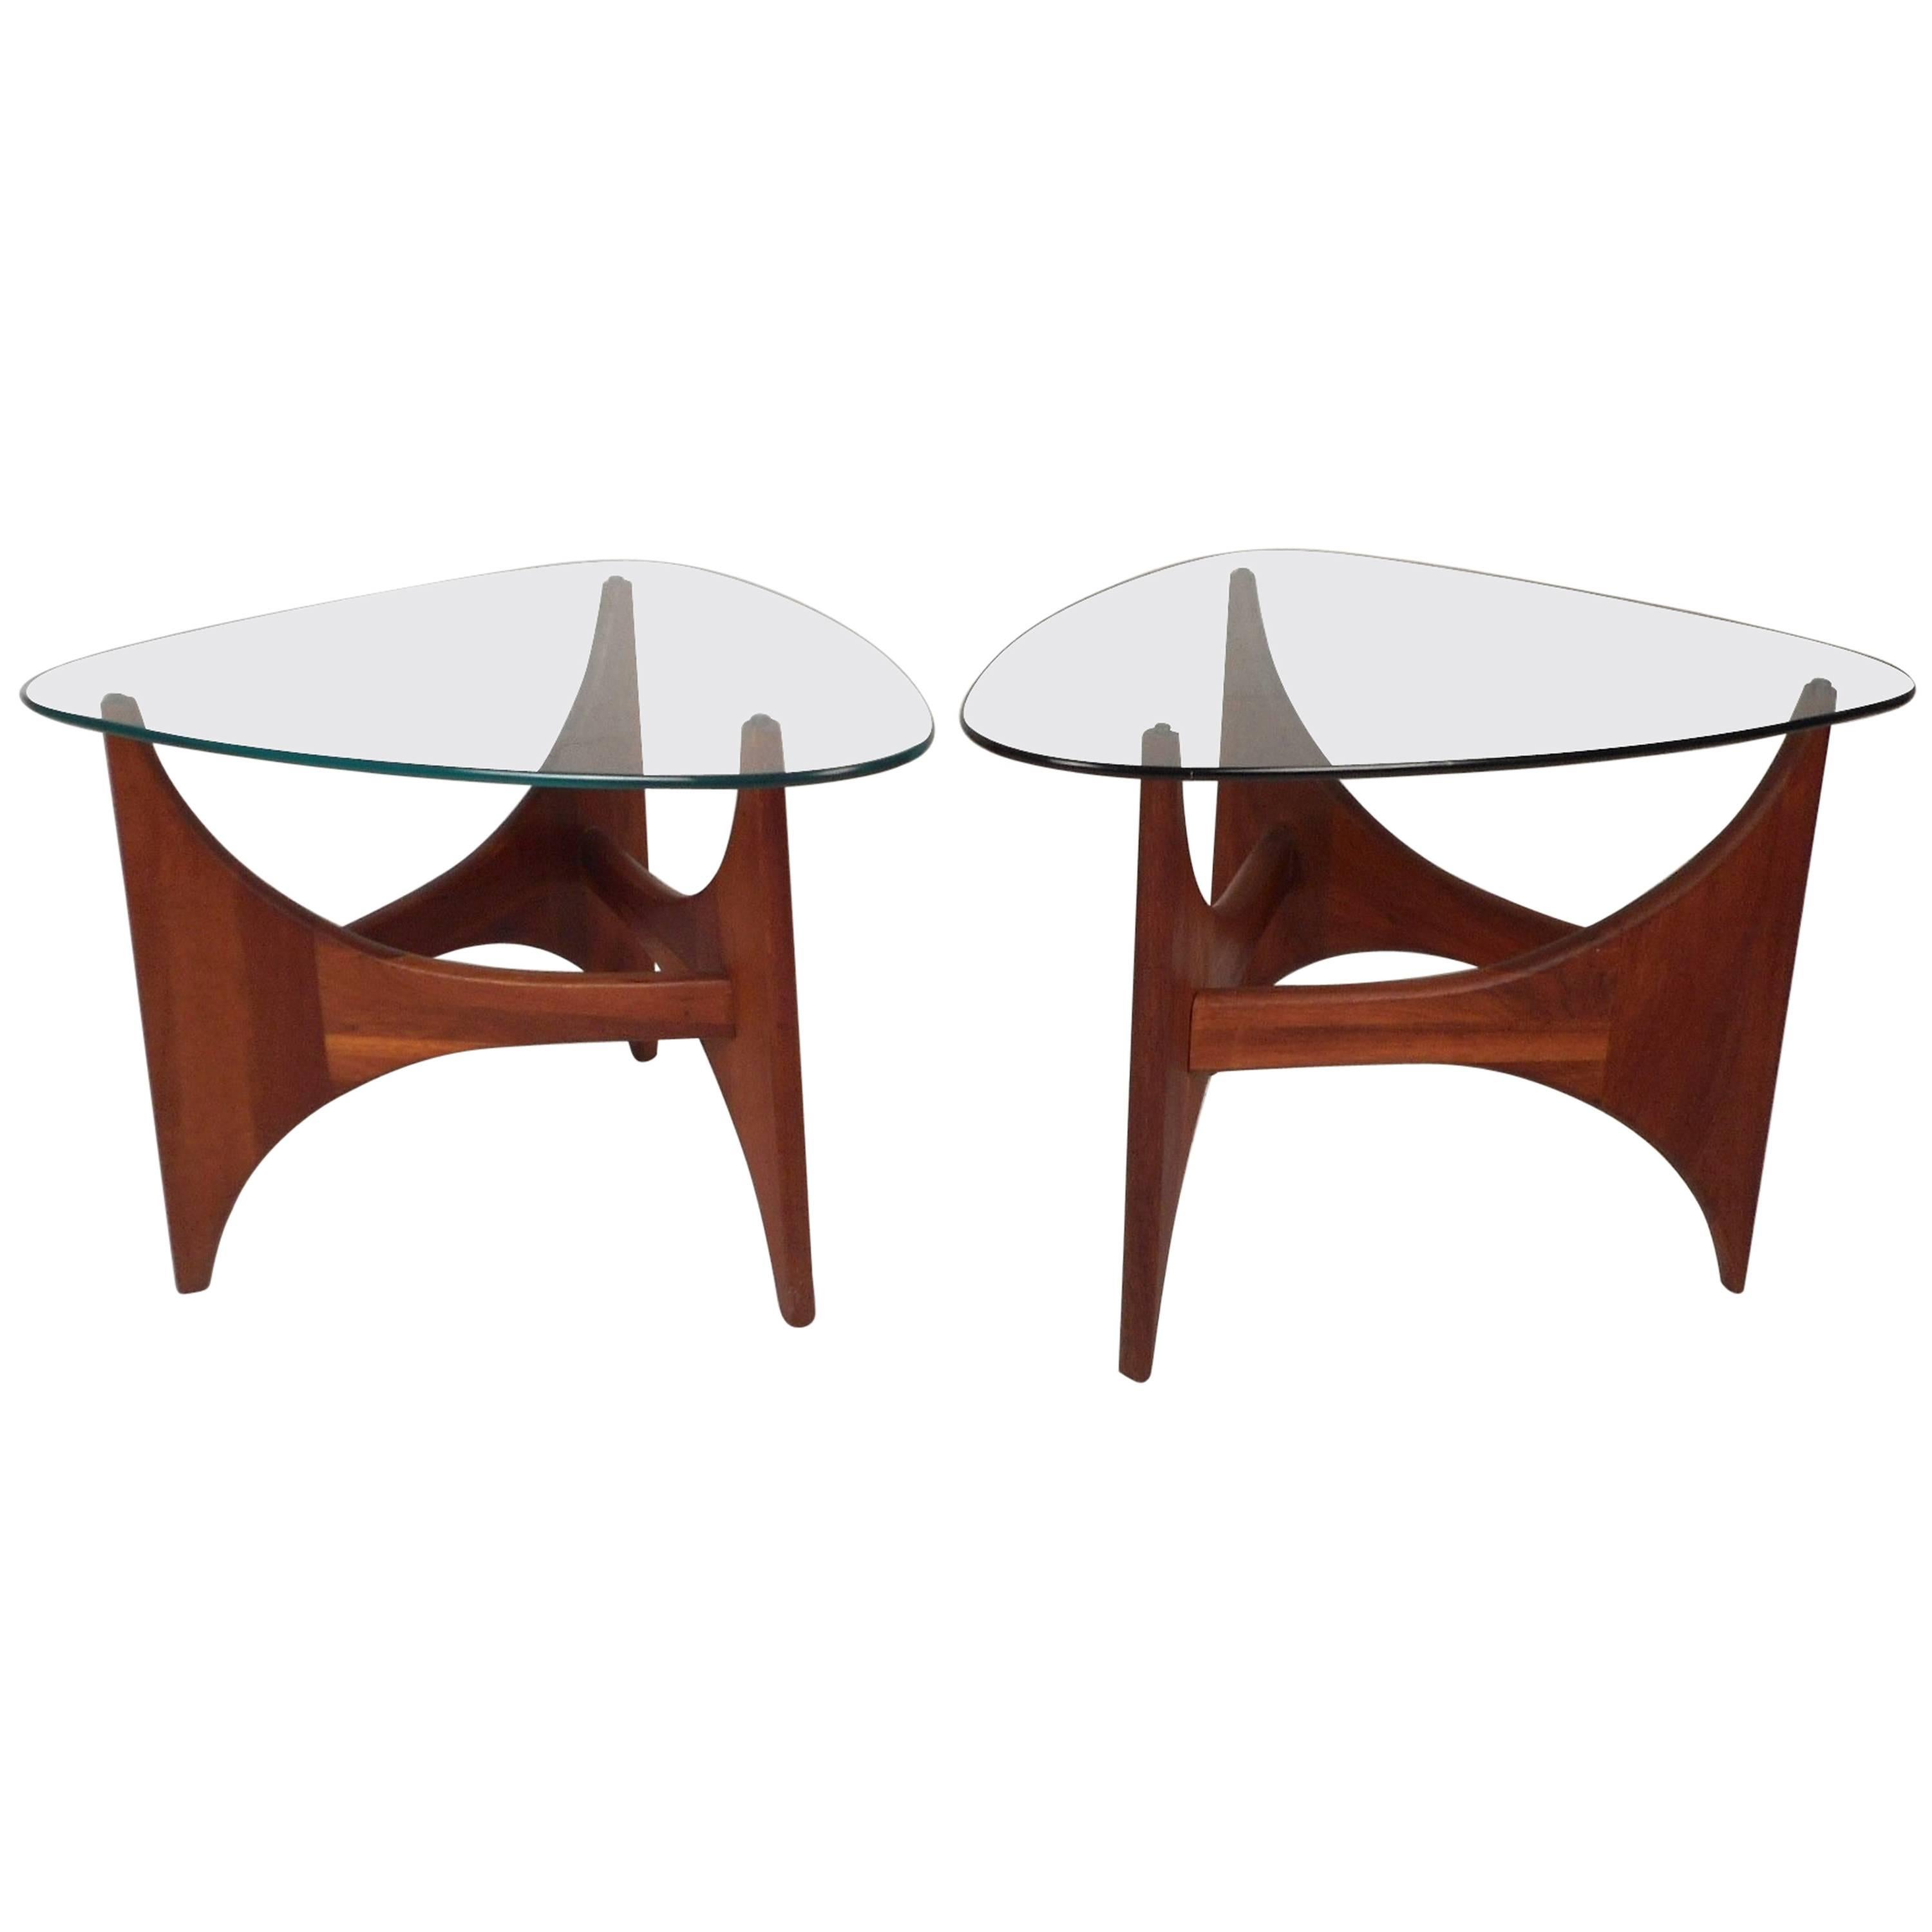 Pair of Mid-Century Modern Triangular End Tables by Adrian Pearsall